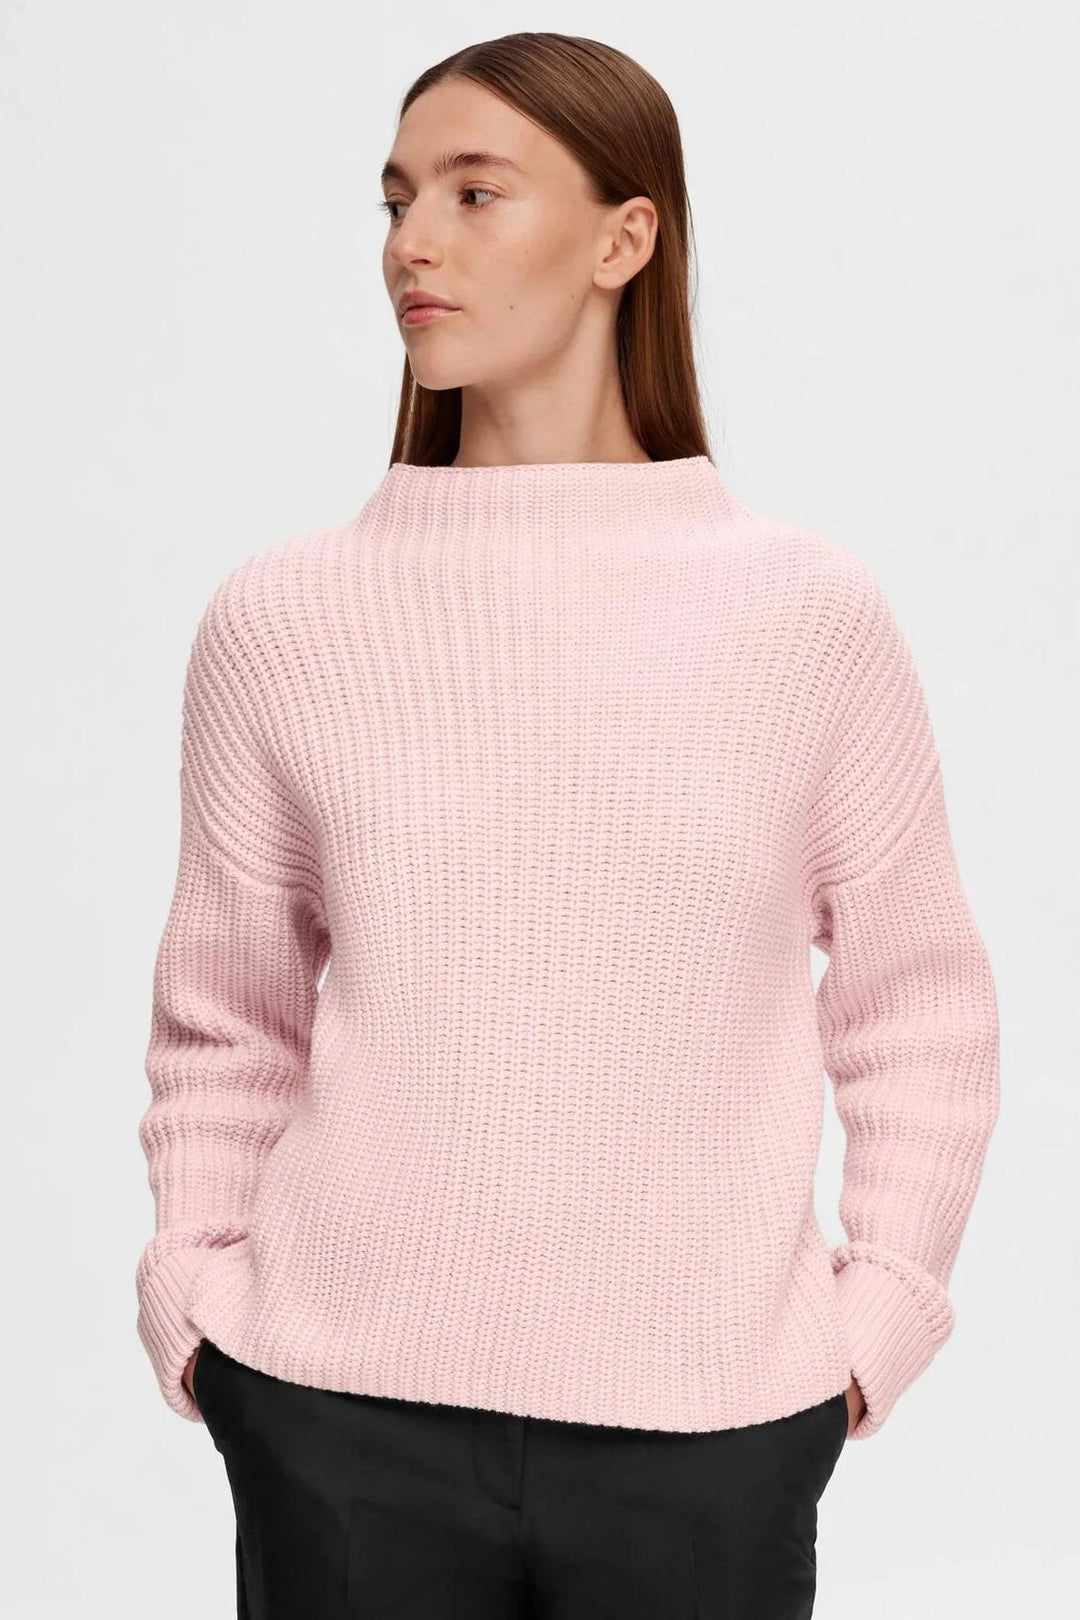 Selected Femme | Sweater | Selma LS Knit Pullover, cradle pink